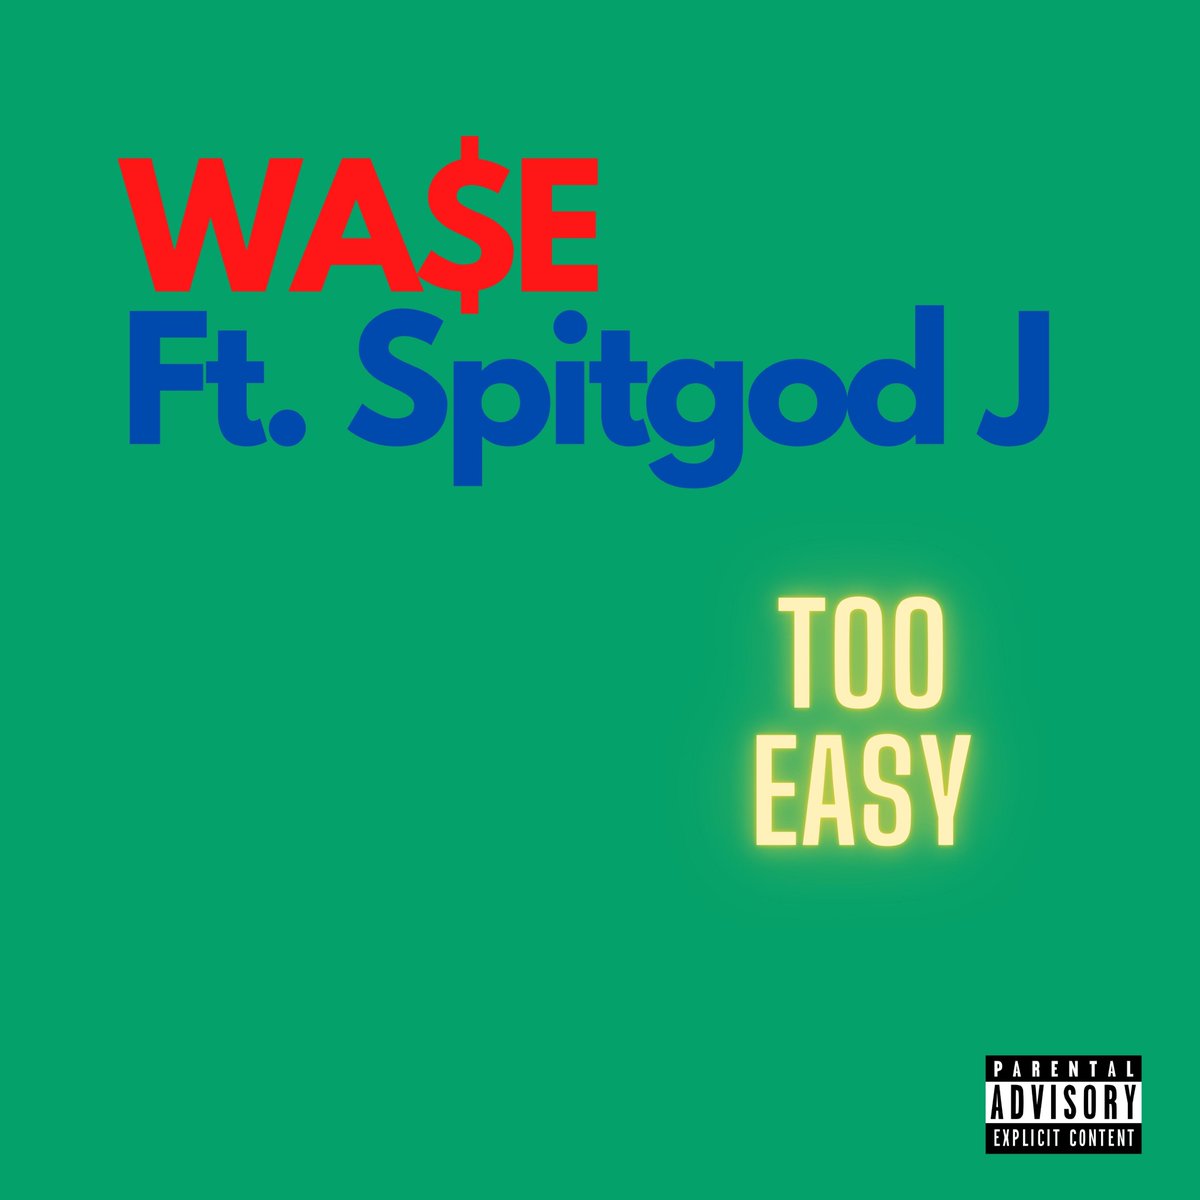 Pre-save my new single 'Too Easy (feat. Spitgod J)' on Spotify: distrokid.com/hyperfollow/wa… (powered by @distrokid)